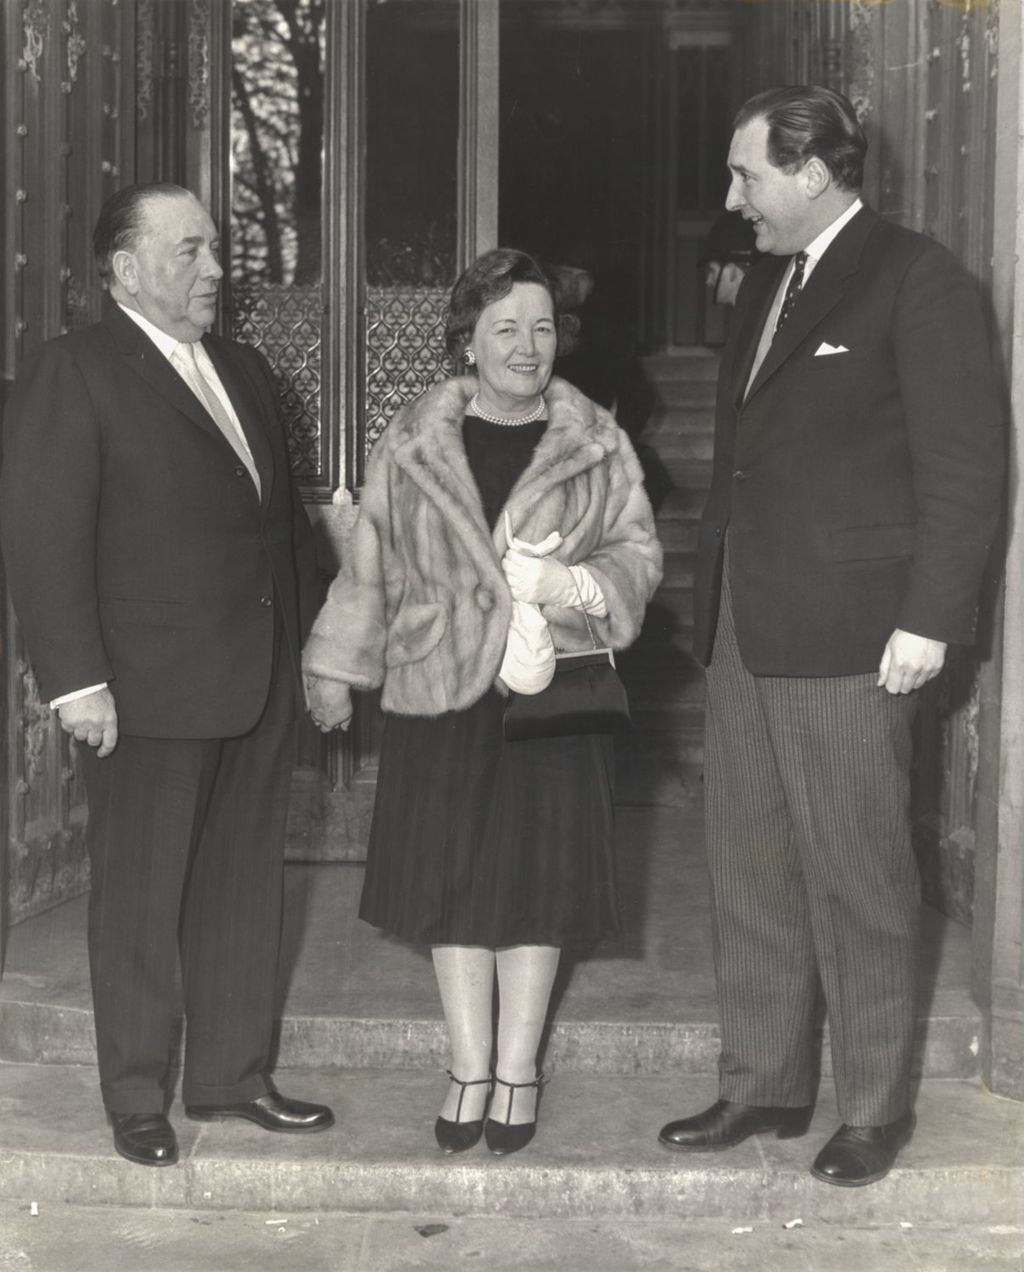 Richard J. and Eleanor Daley with a member of Parliament at the House of Commons in London